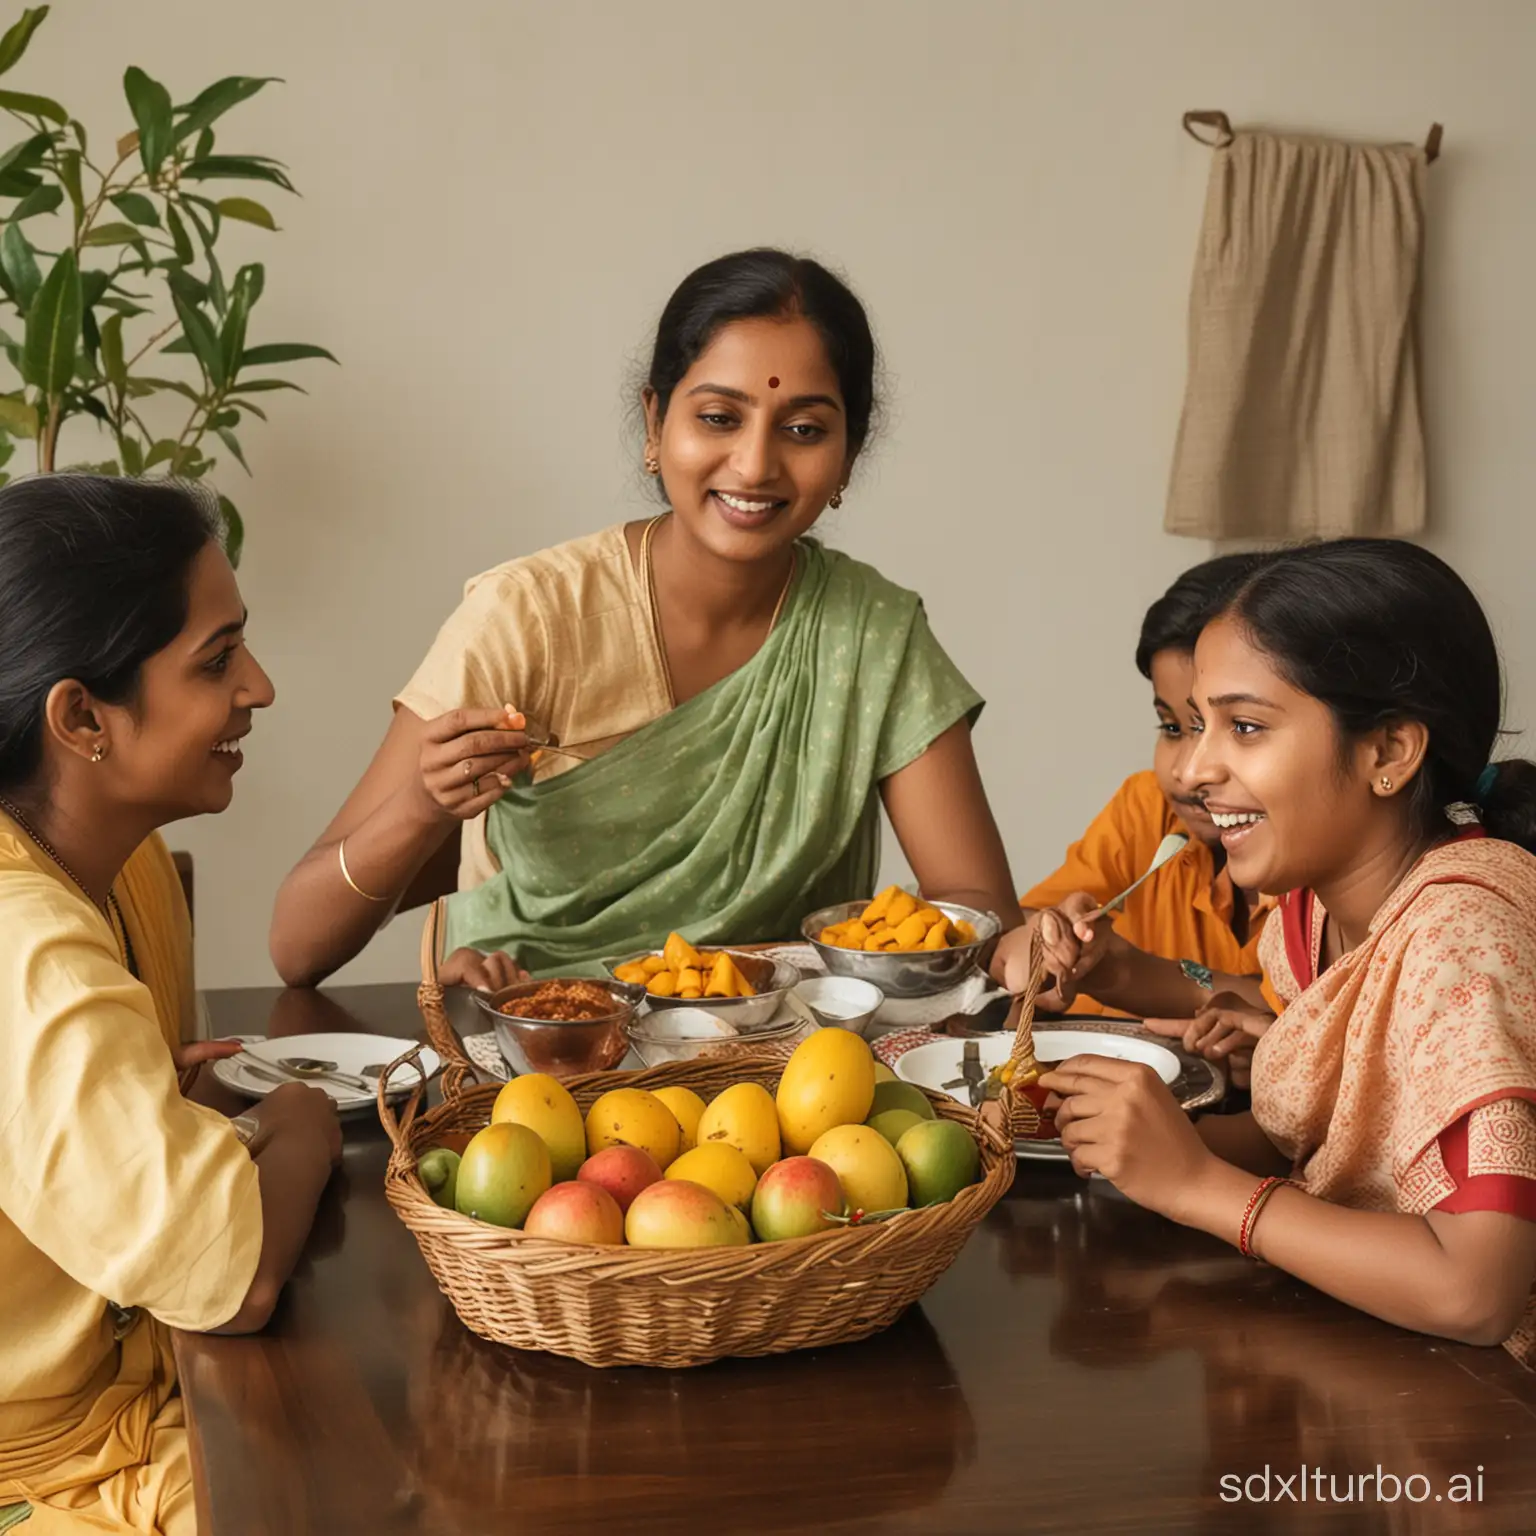 A south indian family is sitting in the dining table. The dining table has a basket of mangoes. The family is eating mangoes.